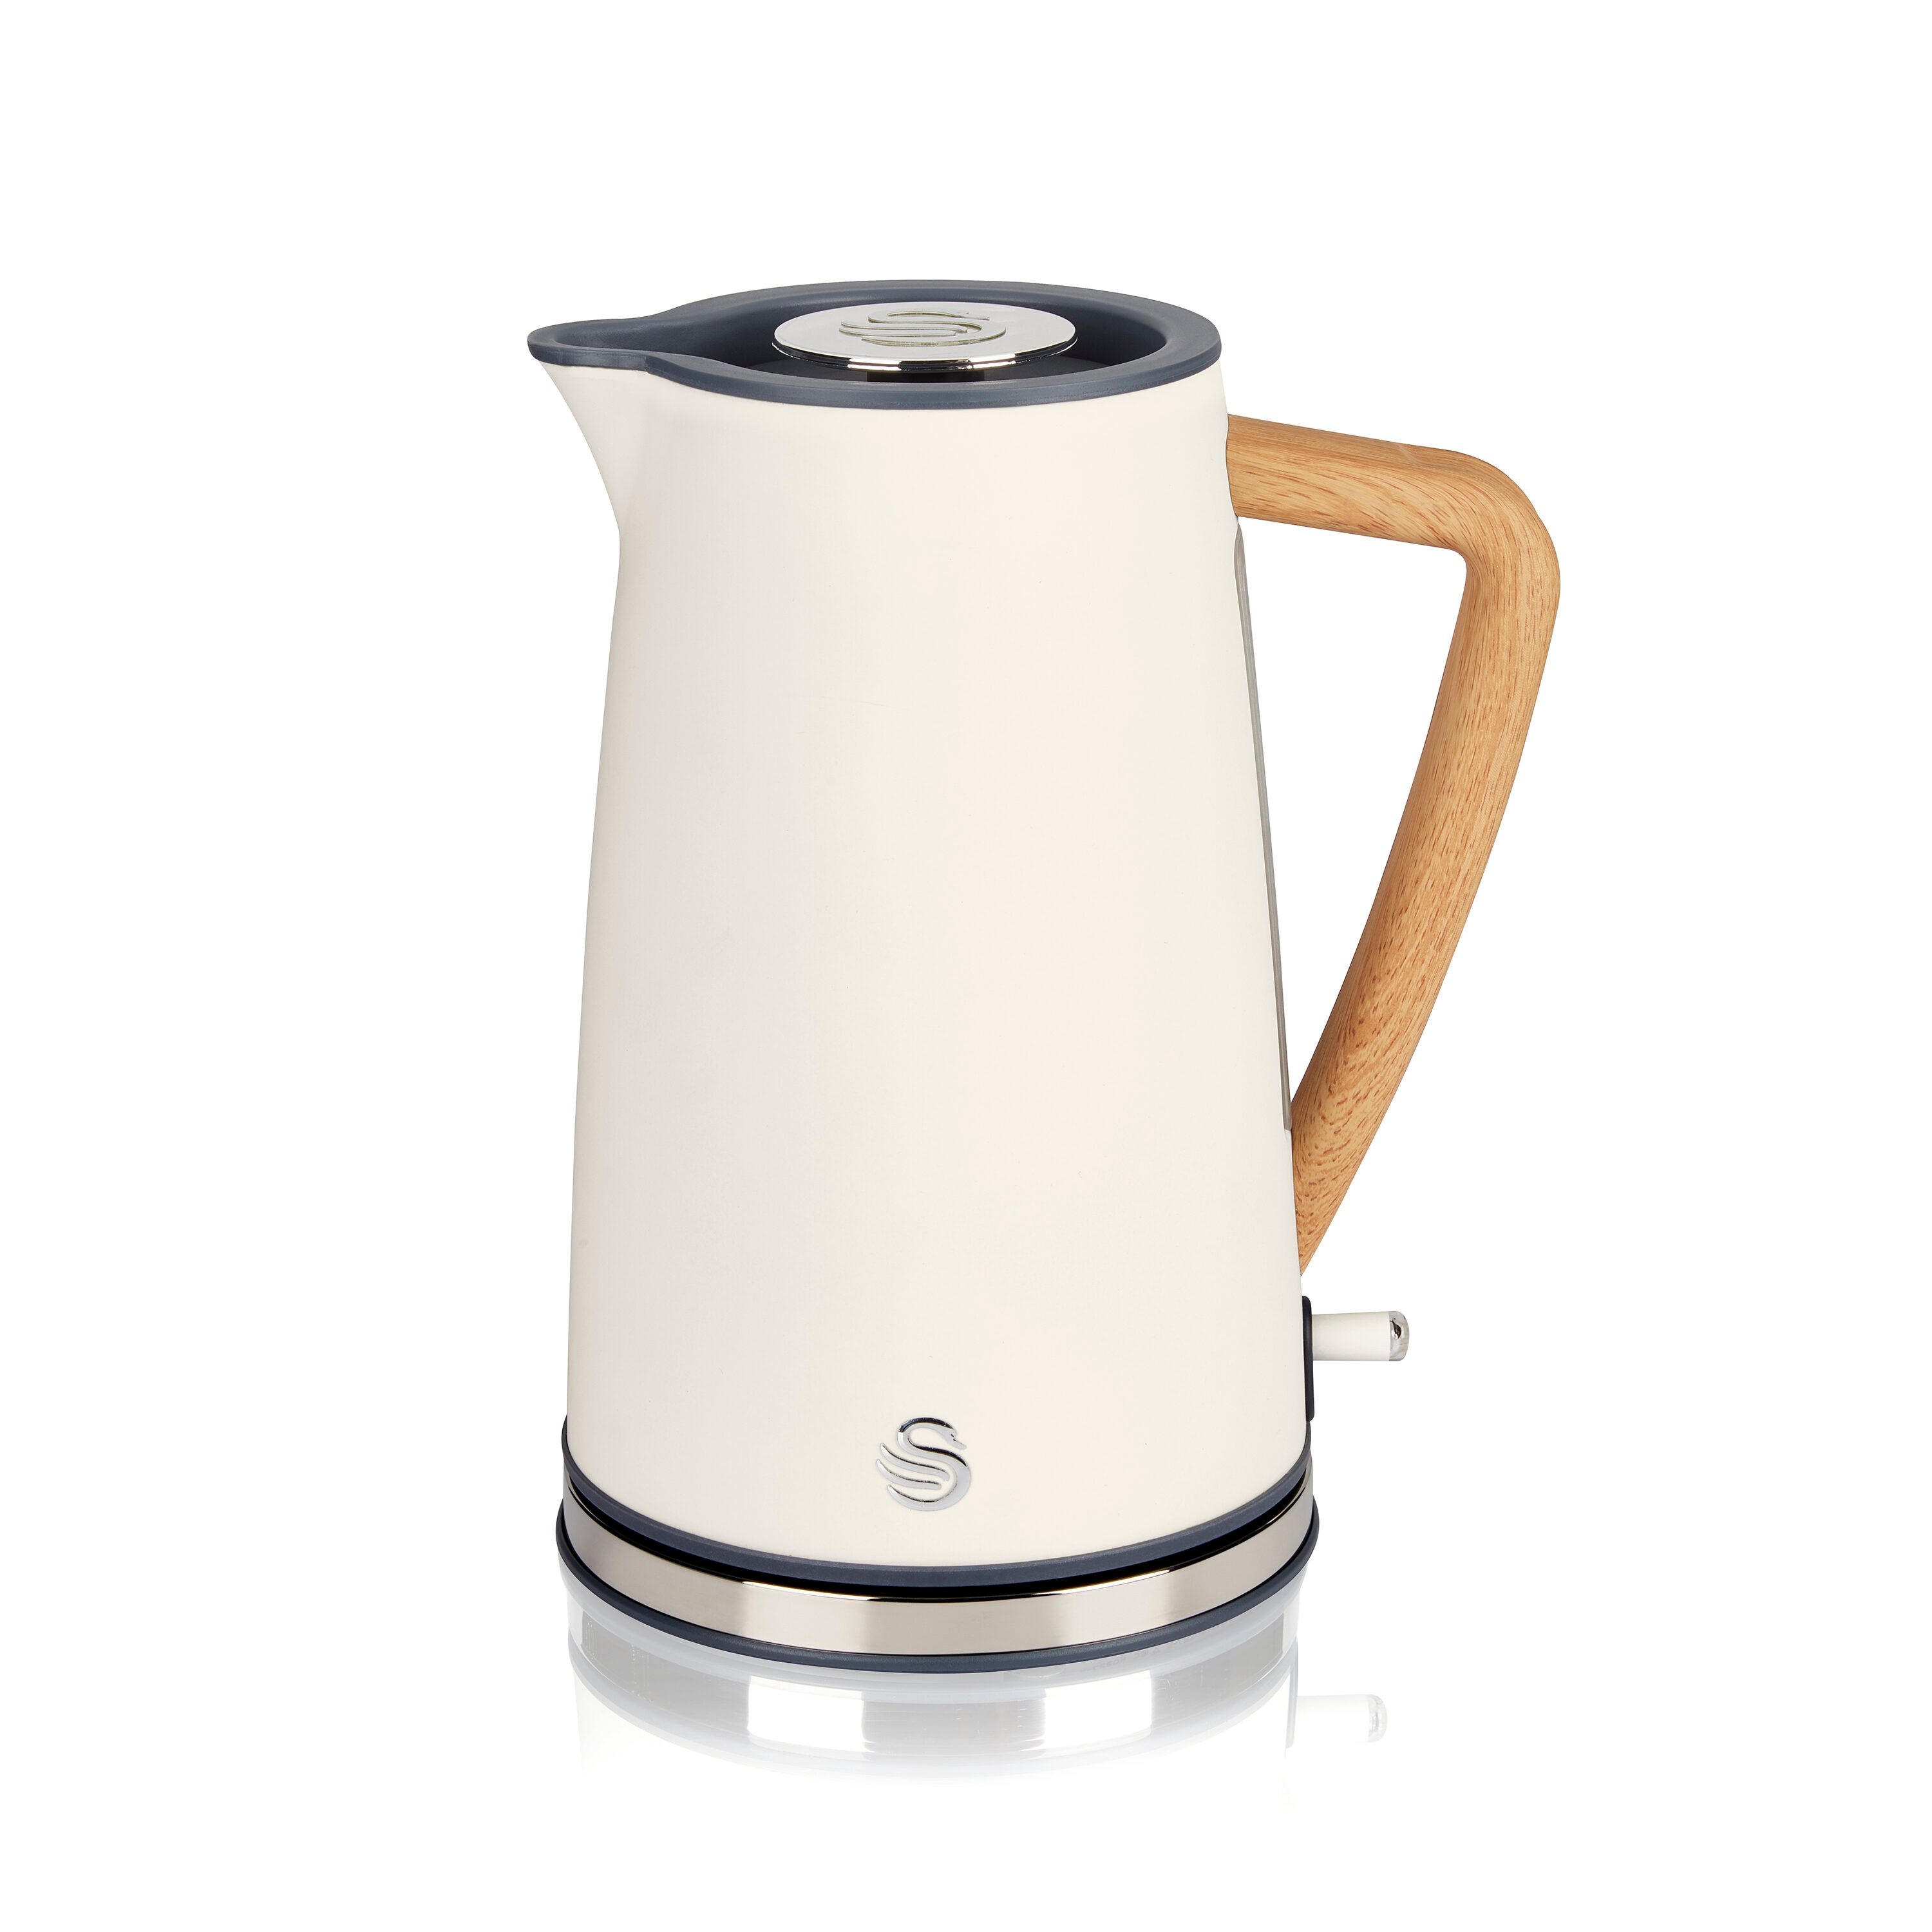 Dorset Putty Electric Kettle